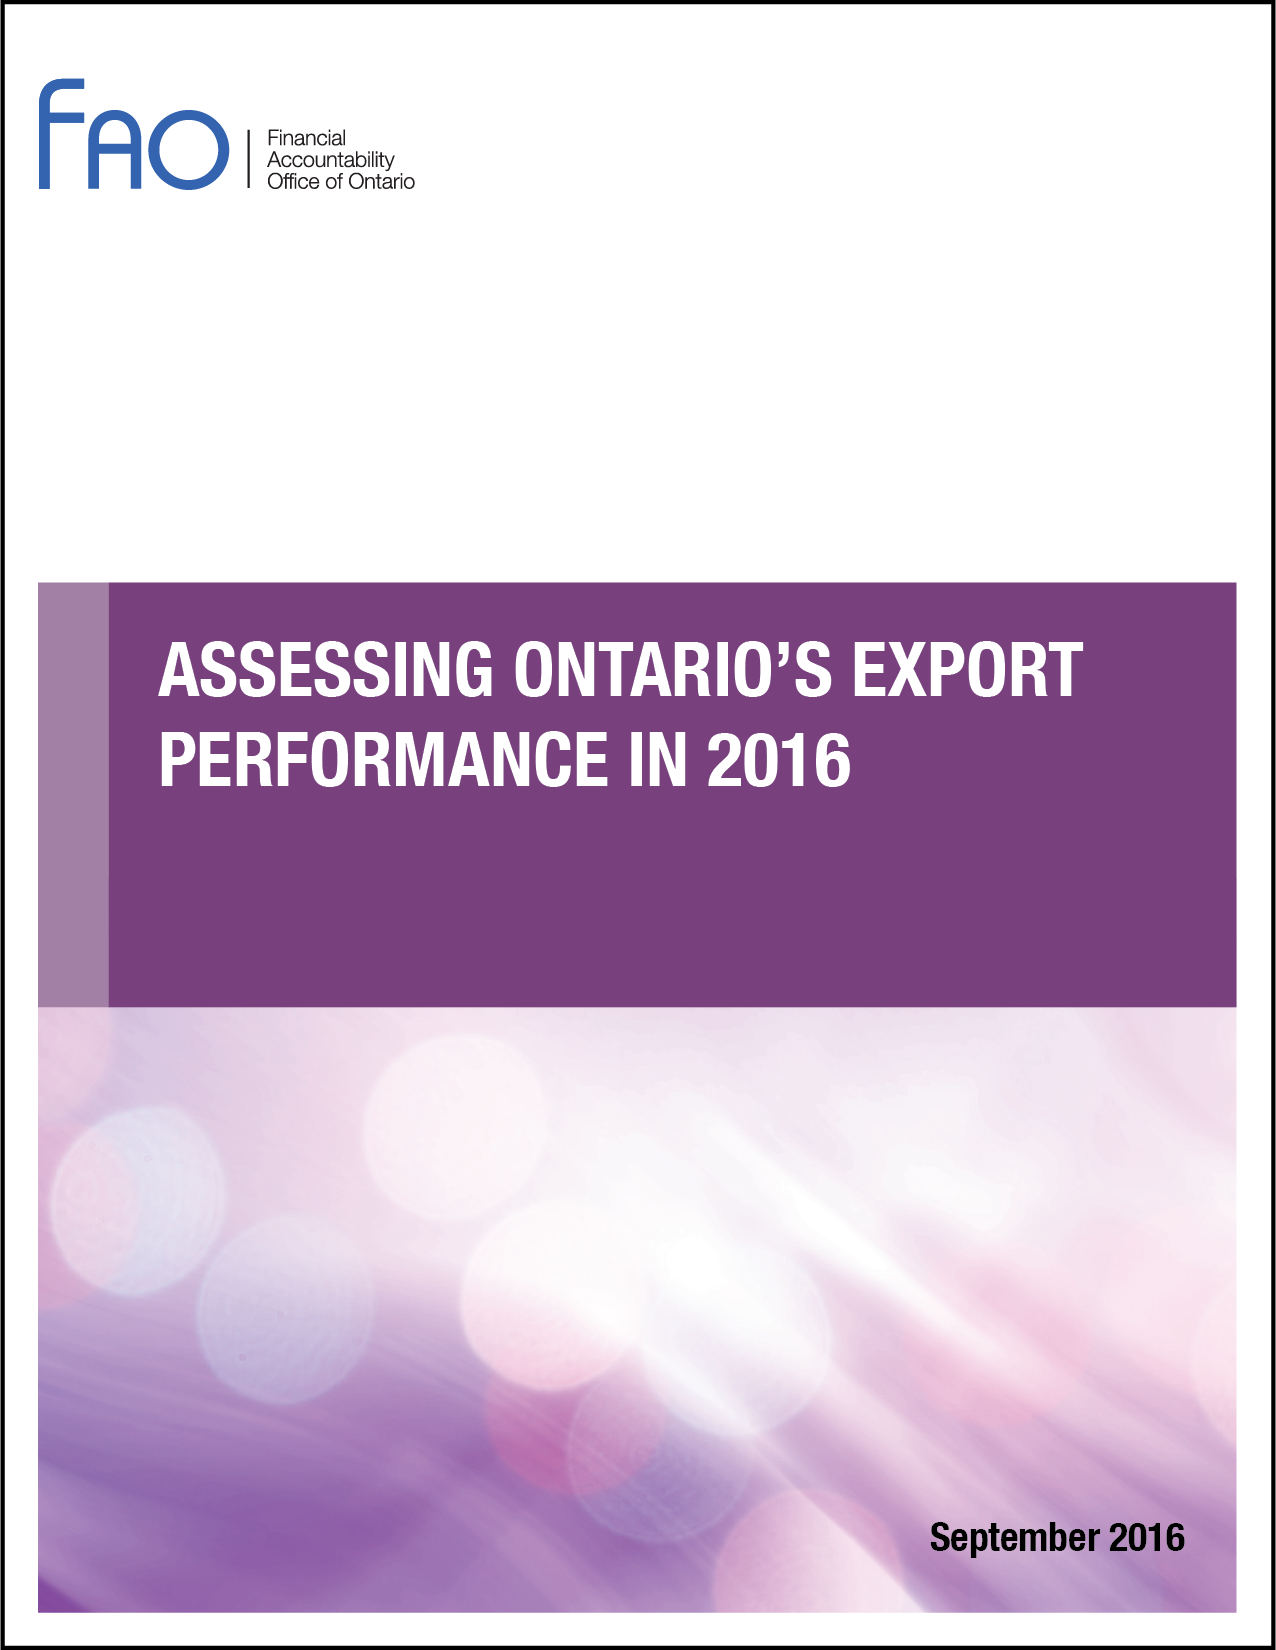 Assessing Ontario’s Export Performance in 2016